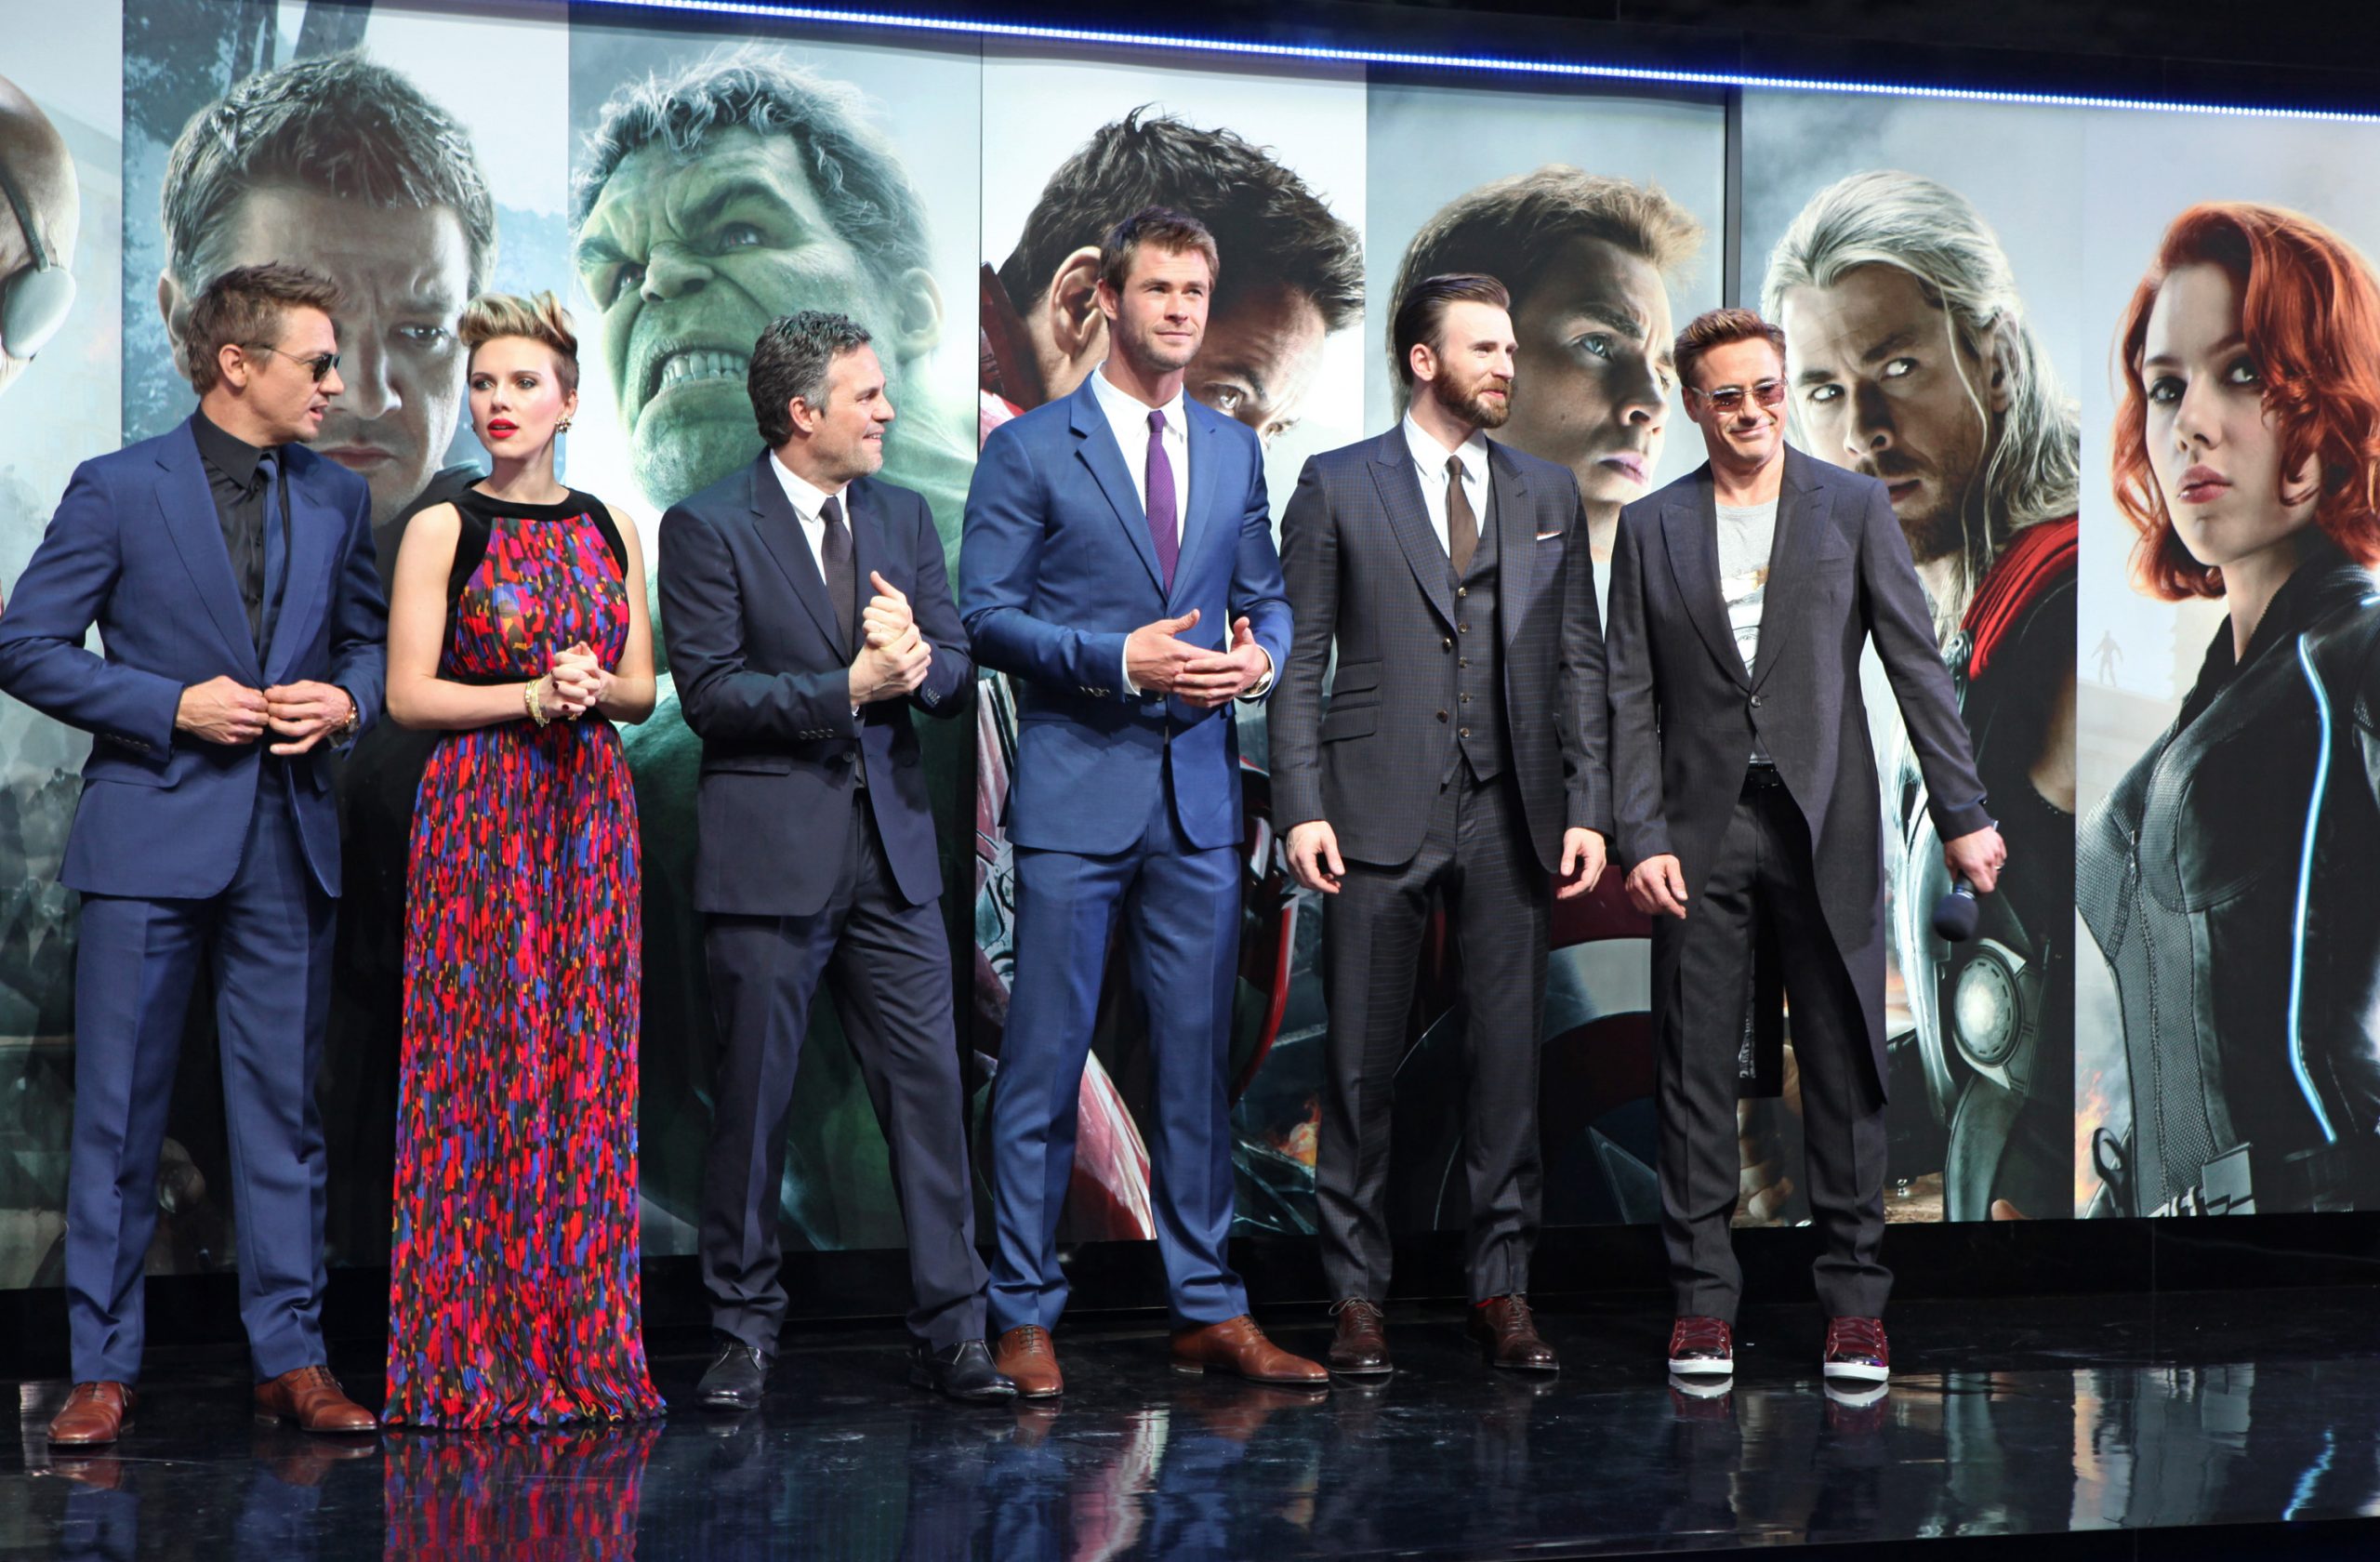 'Avengers' movies stars Jeremy Renner, Scarlett Johansson, Mark Ruffalo, Chris Hemsworth, Chris Evans, and Robert Downey Jr. They're standing in front of a wall featuring their MCU characters and all wearing formal attire.